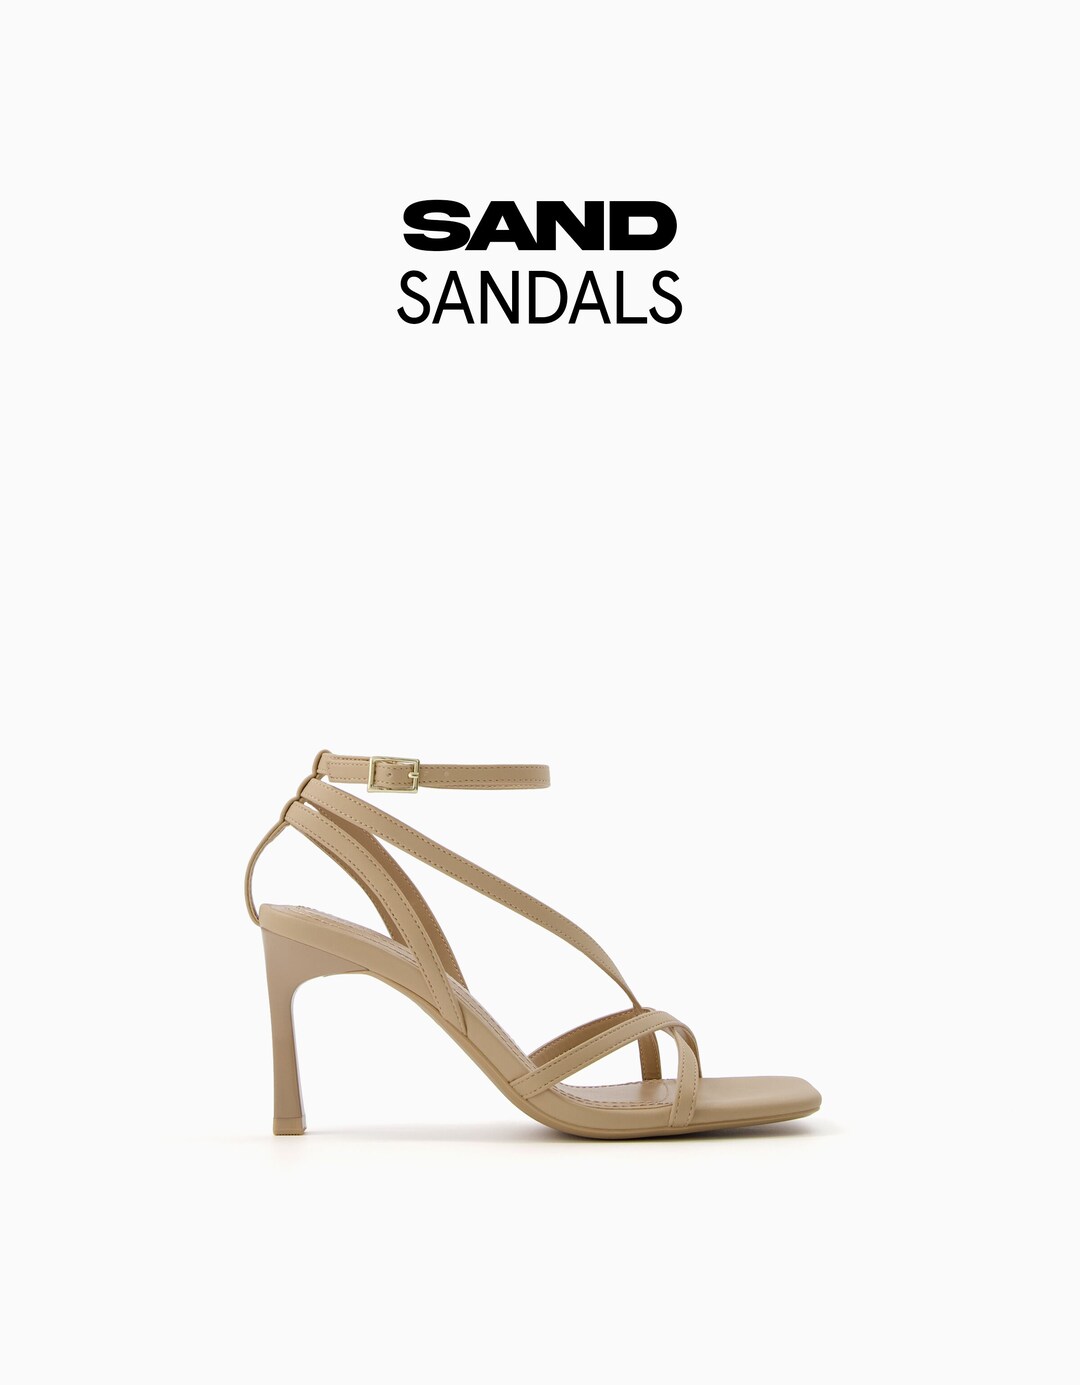 High-heel strappy sandals with ankle strap